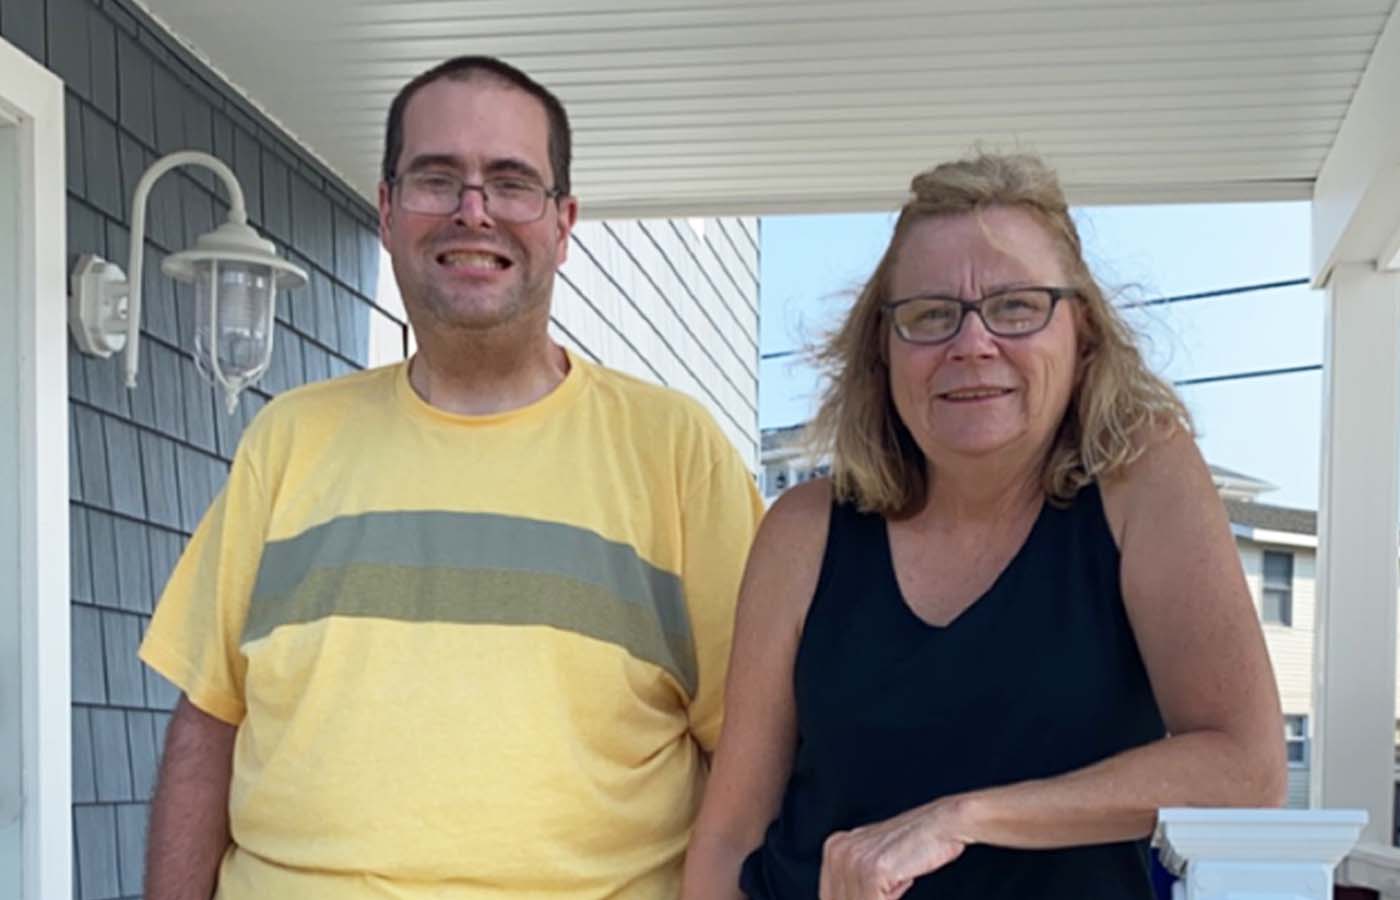 tom and maureen standing on their porch outside smiling together